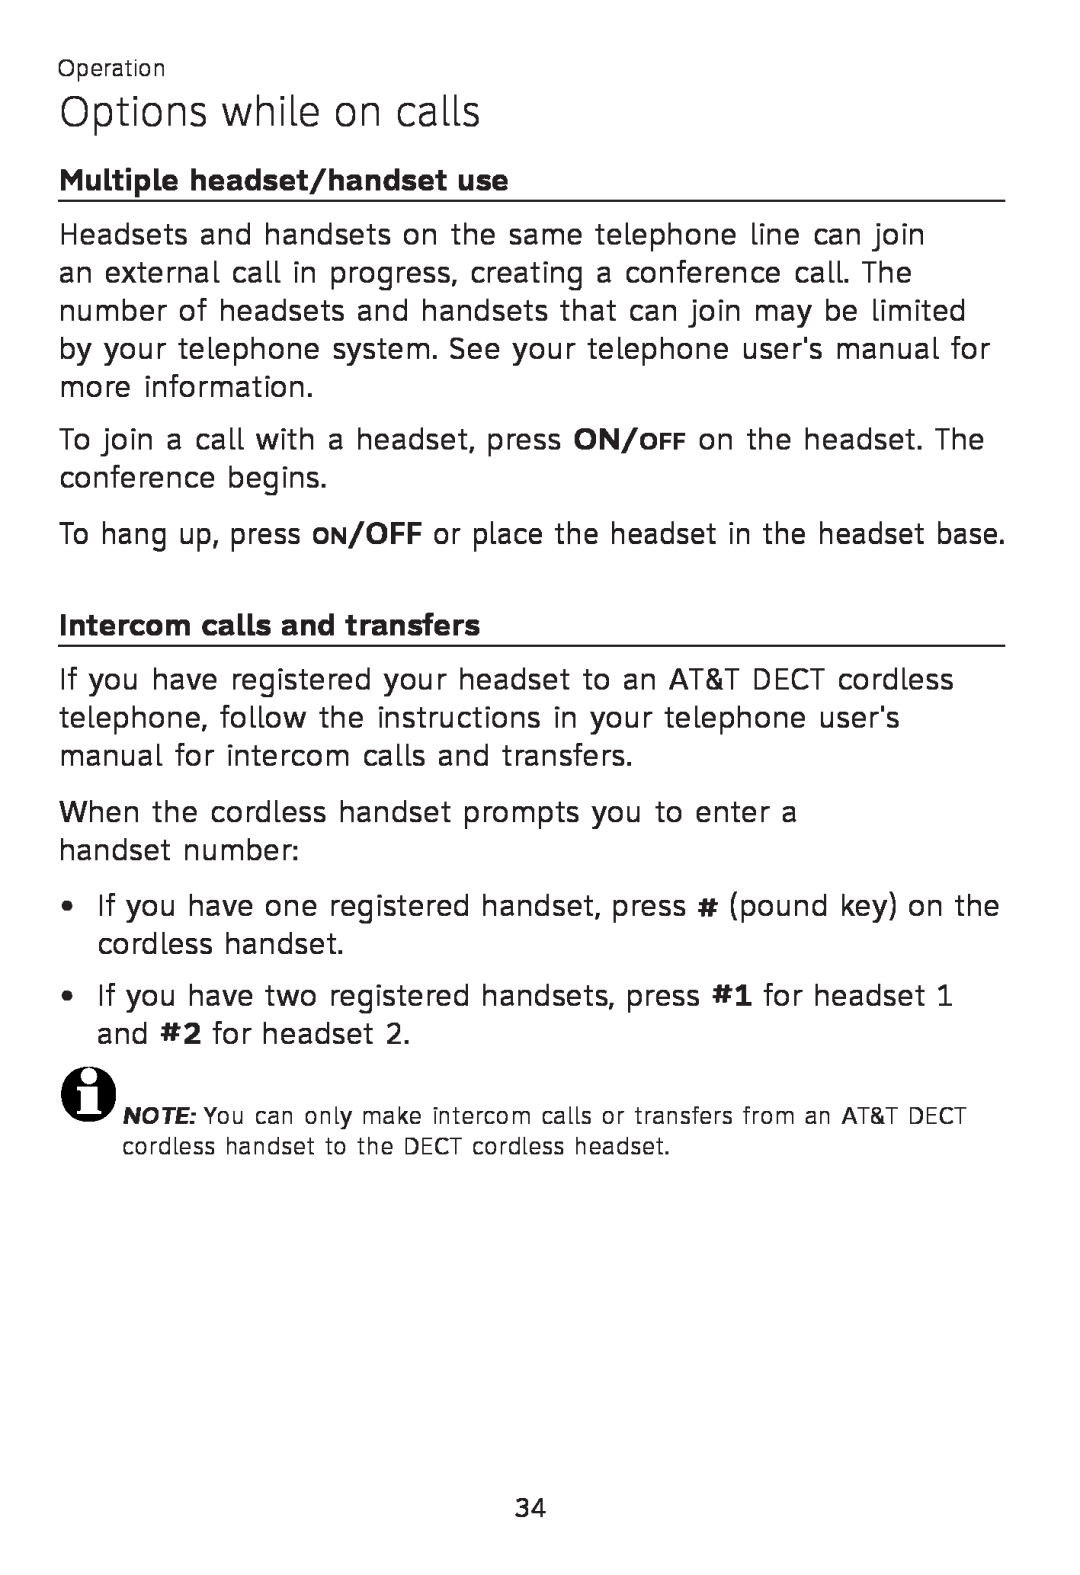 AT&T TL 7610 user manual Multiple headset/handset use, Intercom calls and transfers, Options while on calls 